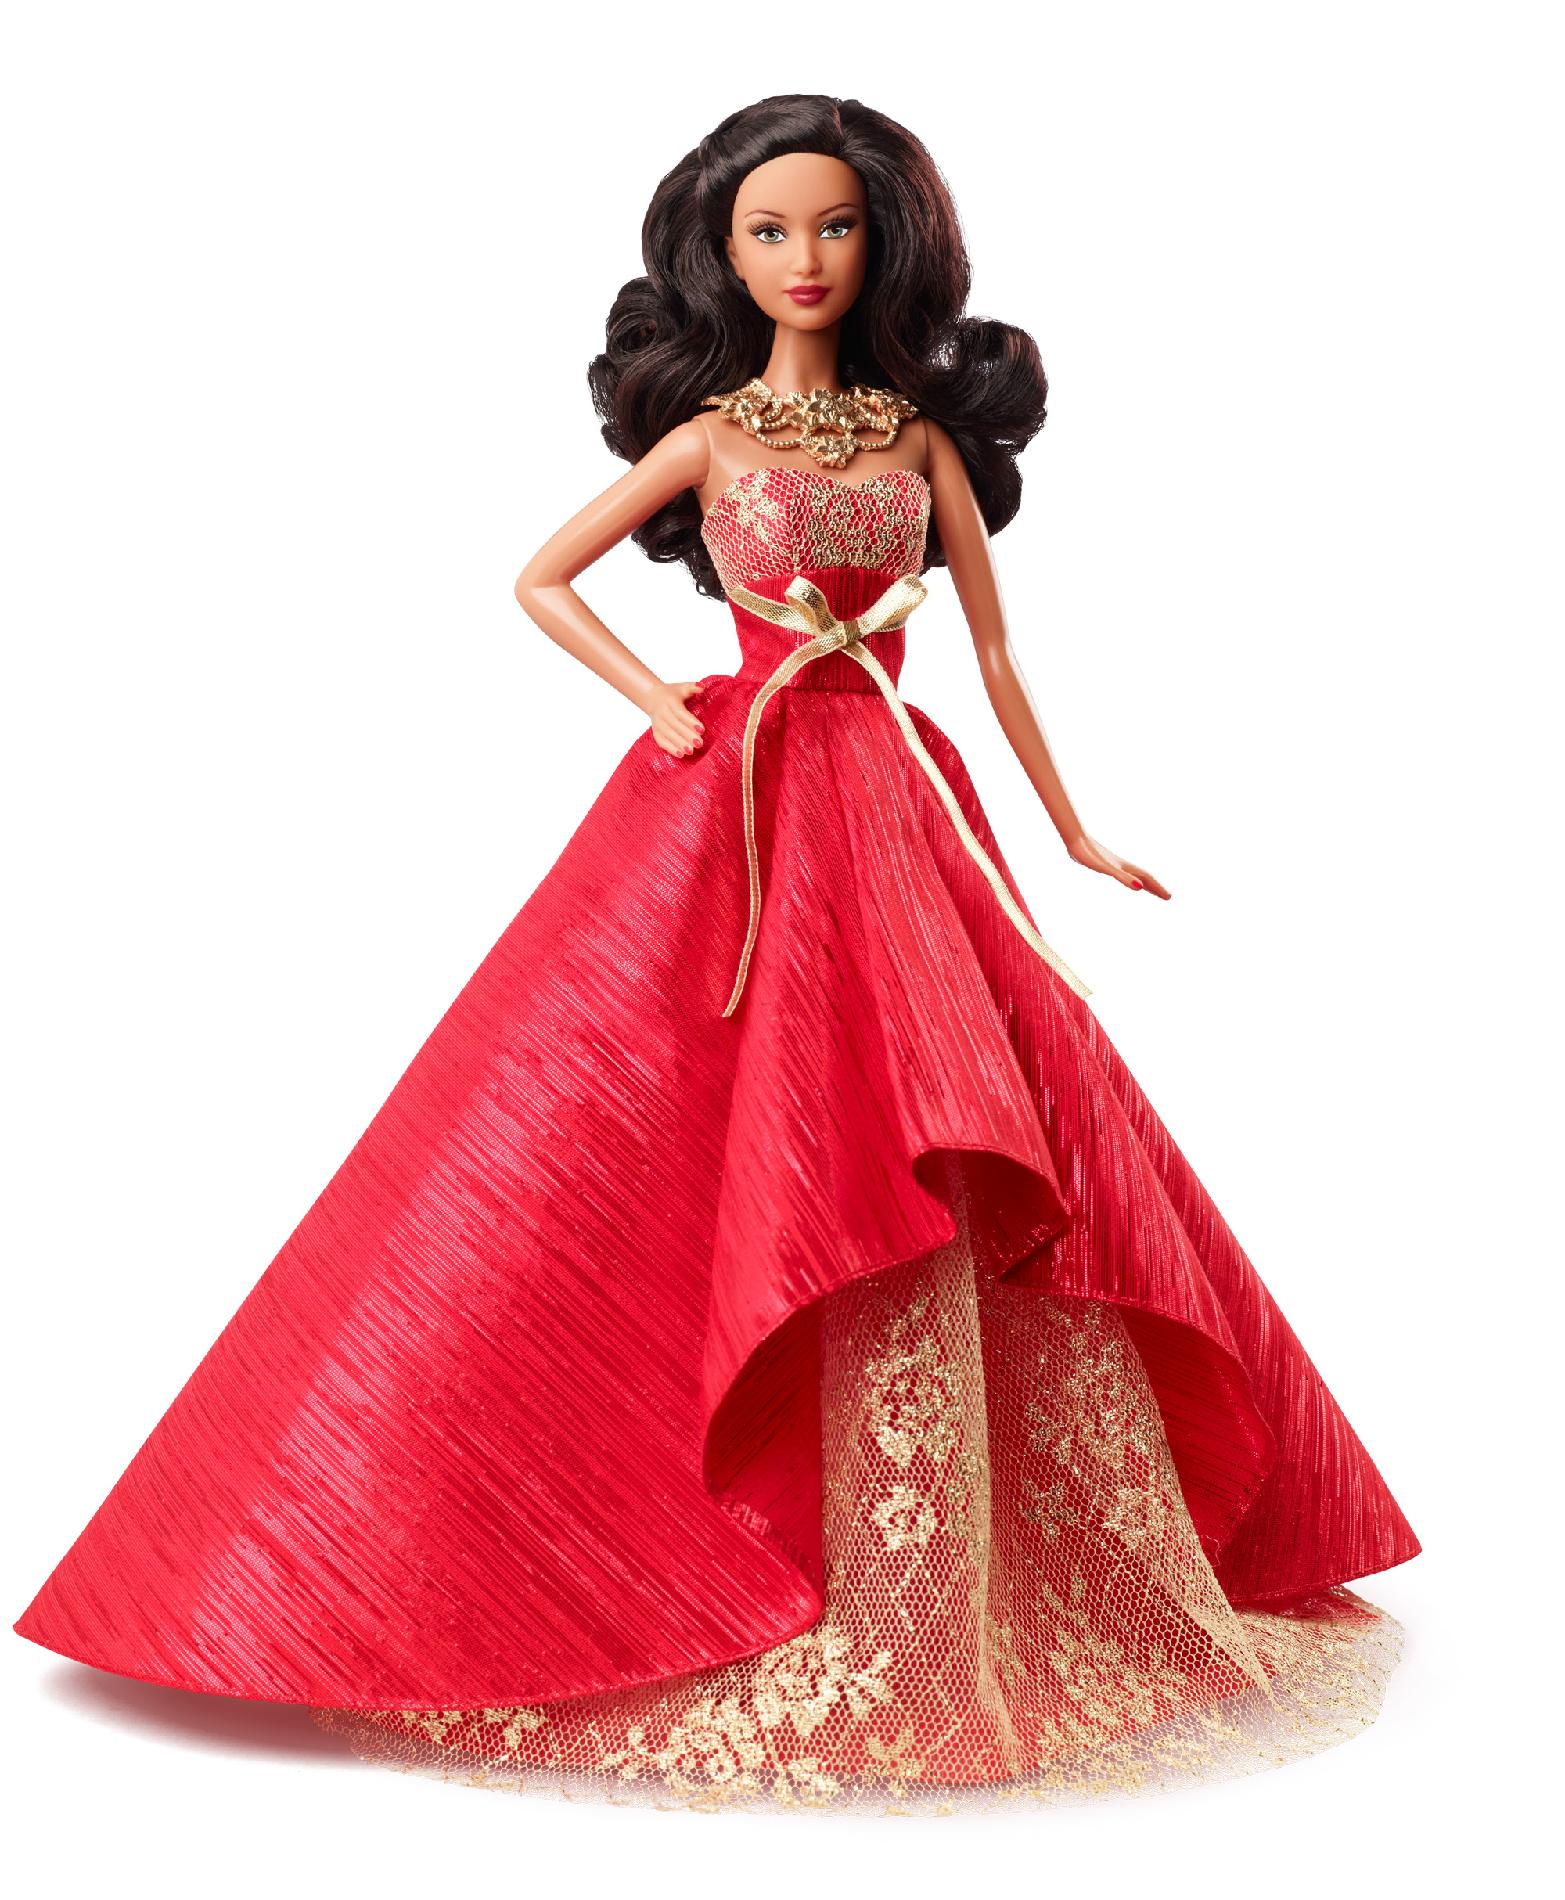 UPC 746775301774 product image for Barbie Collector 2014 Holiday African-American Doll | upcitemdb.com